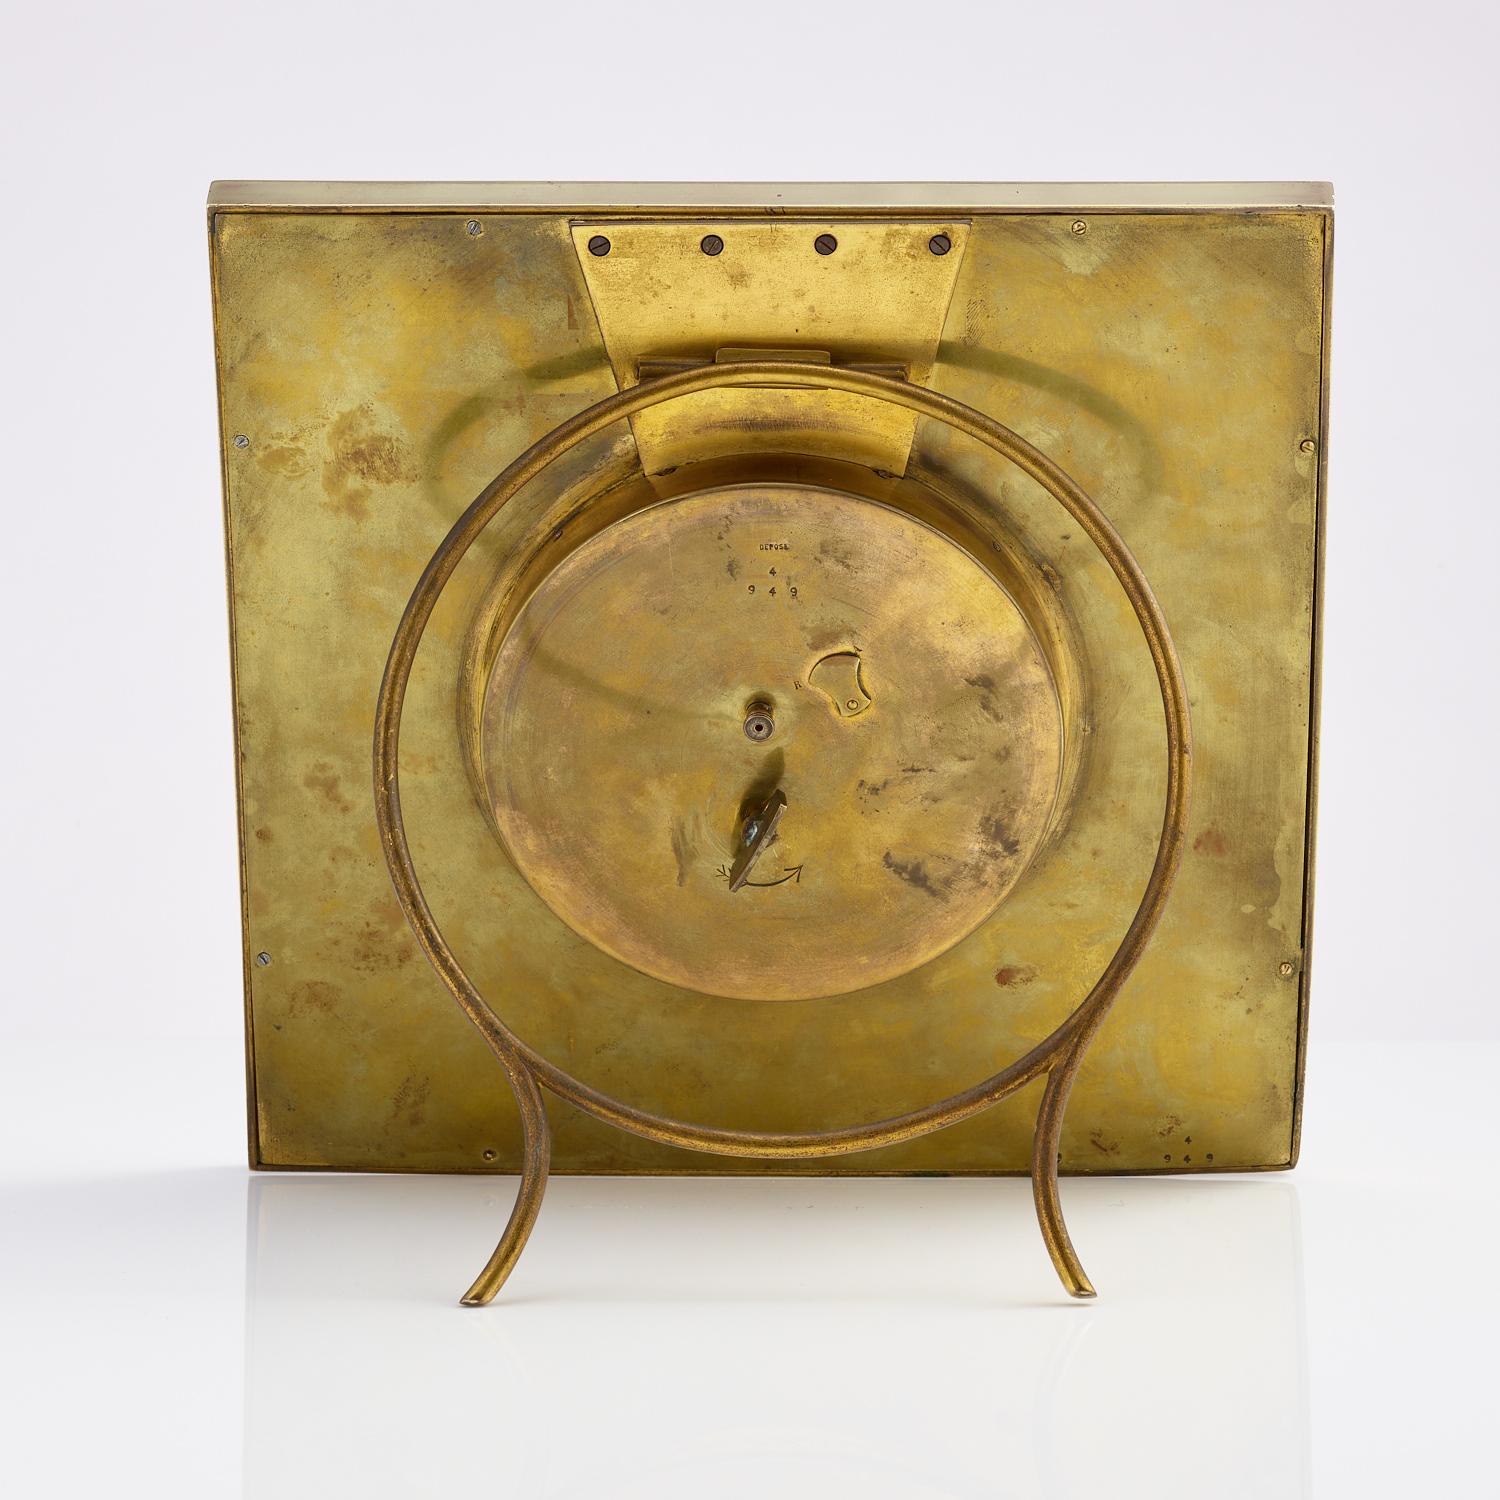 French Large 20th Century Art Deco Desk Clock Made by Kendall of Paris, circa 1930